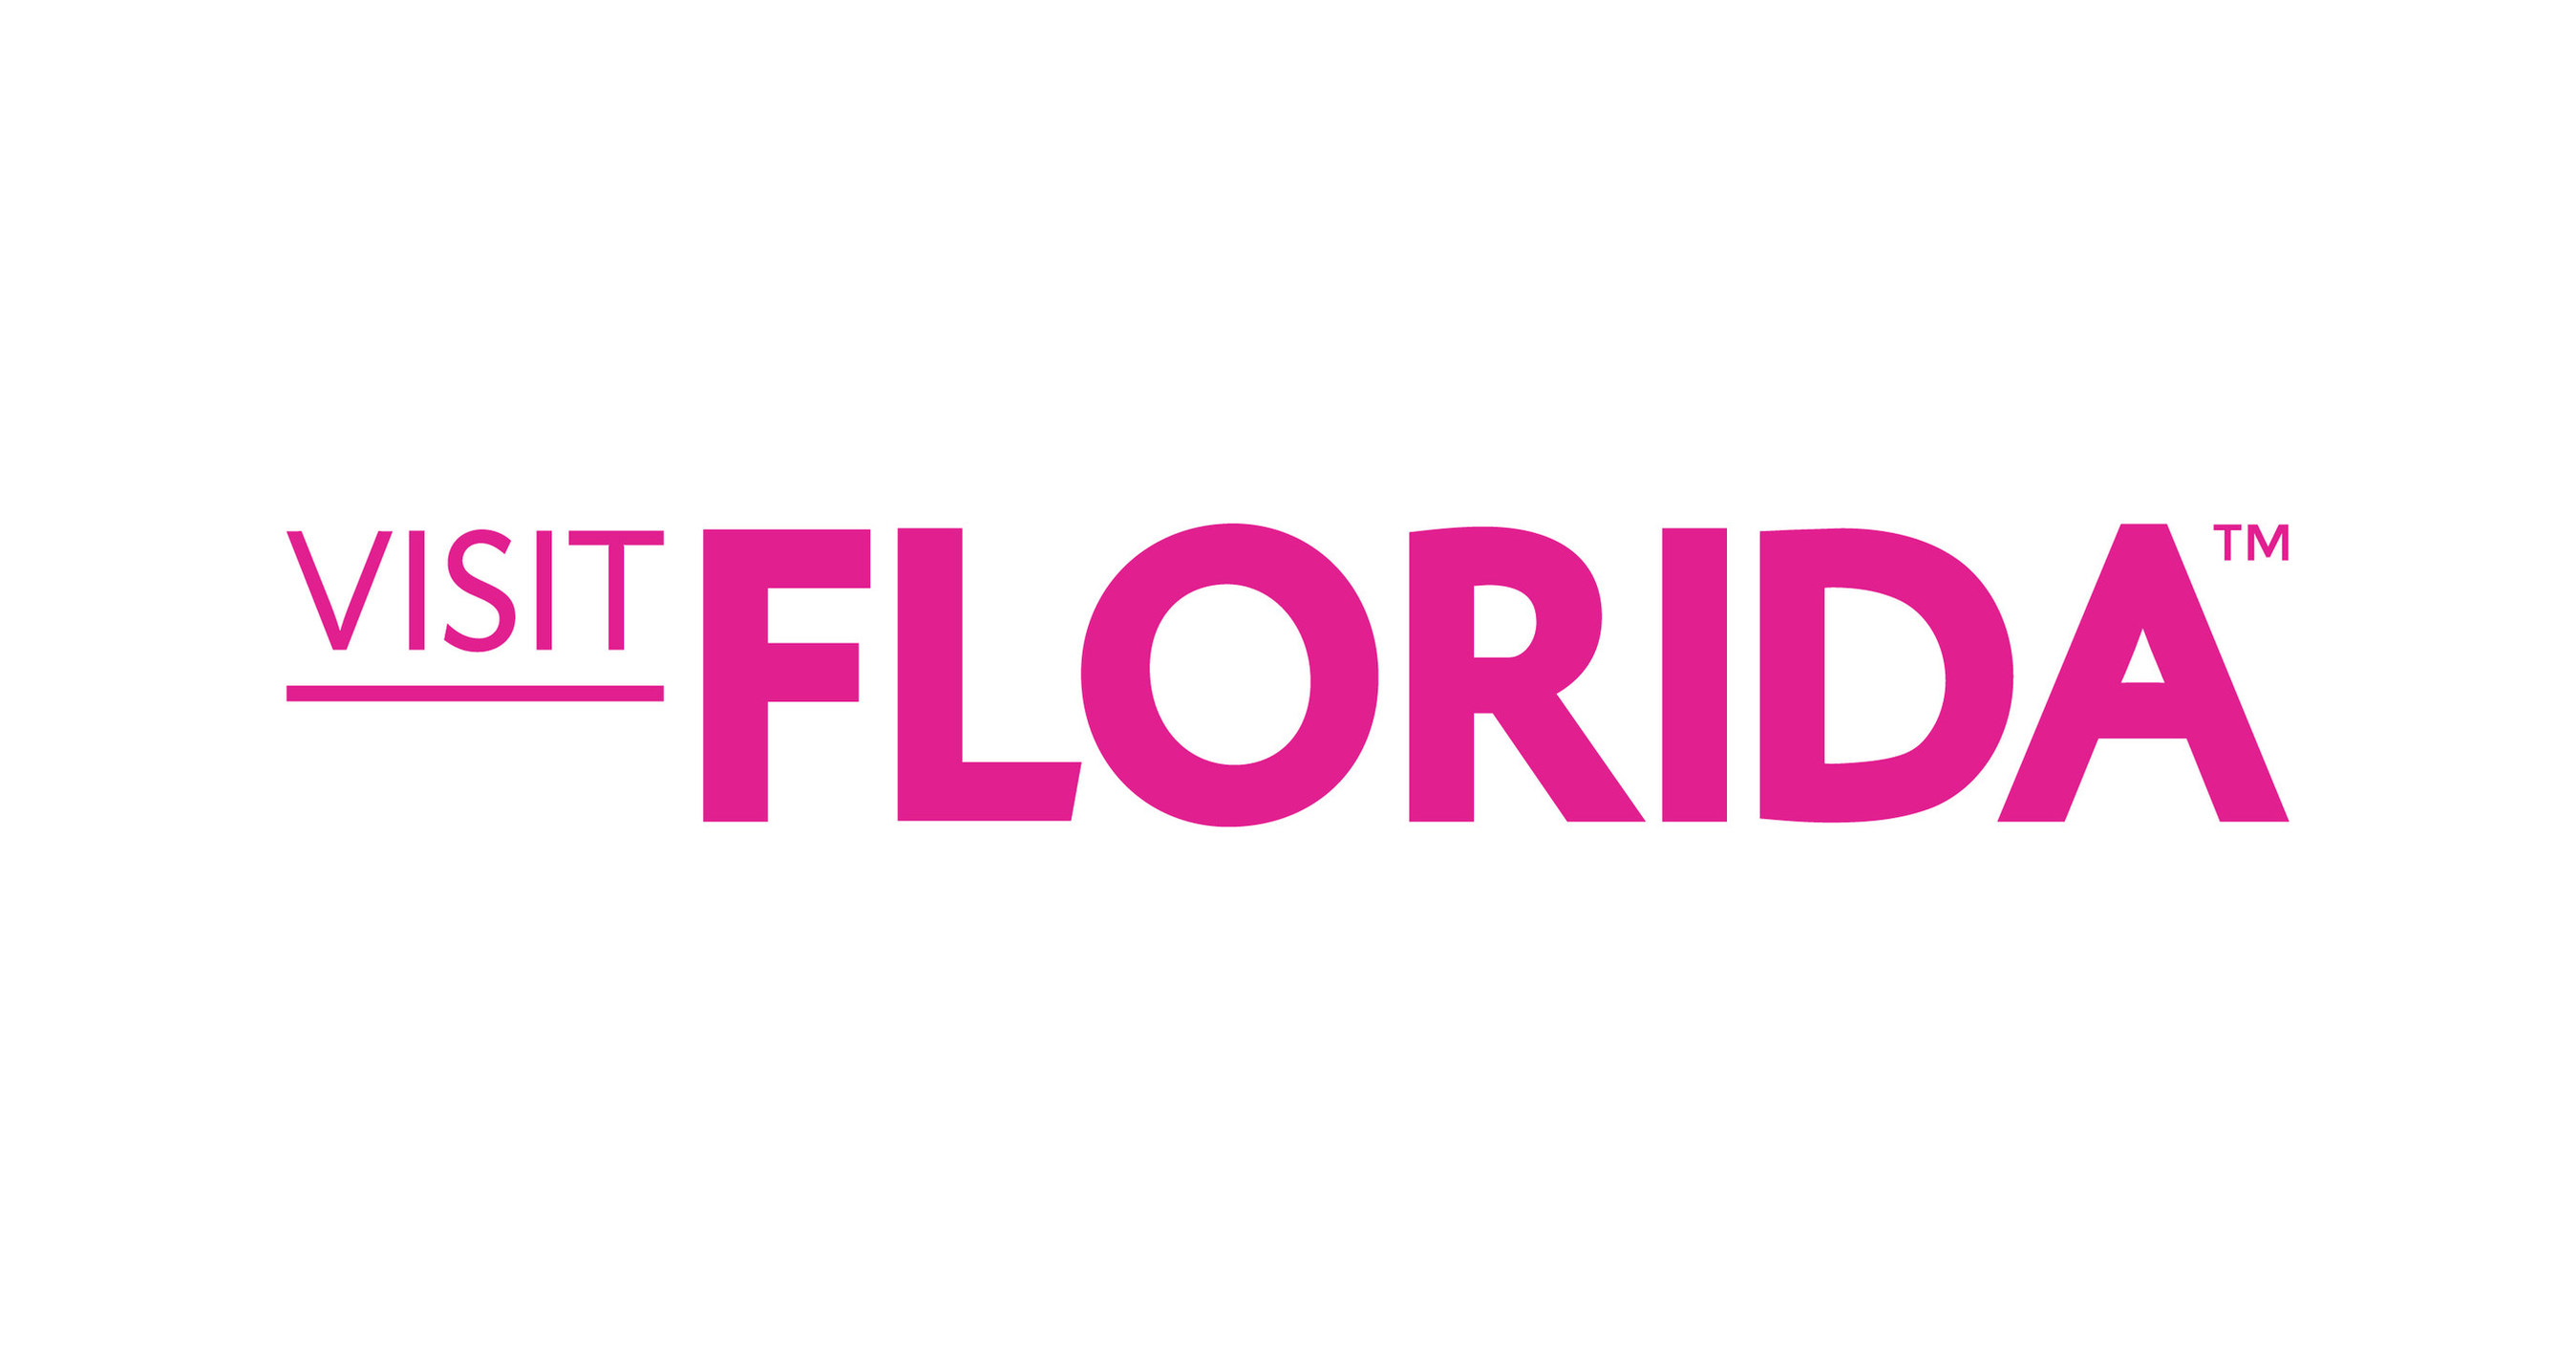 Florida Hoteliers Provide Accommodations for Florida Families in Need